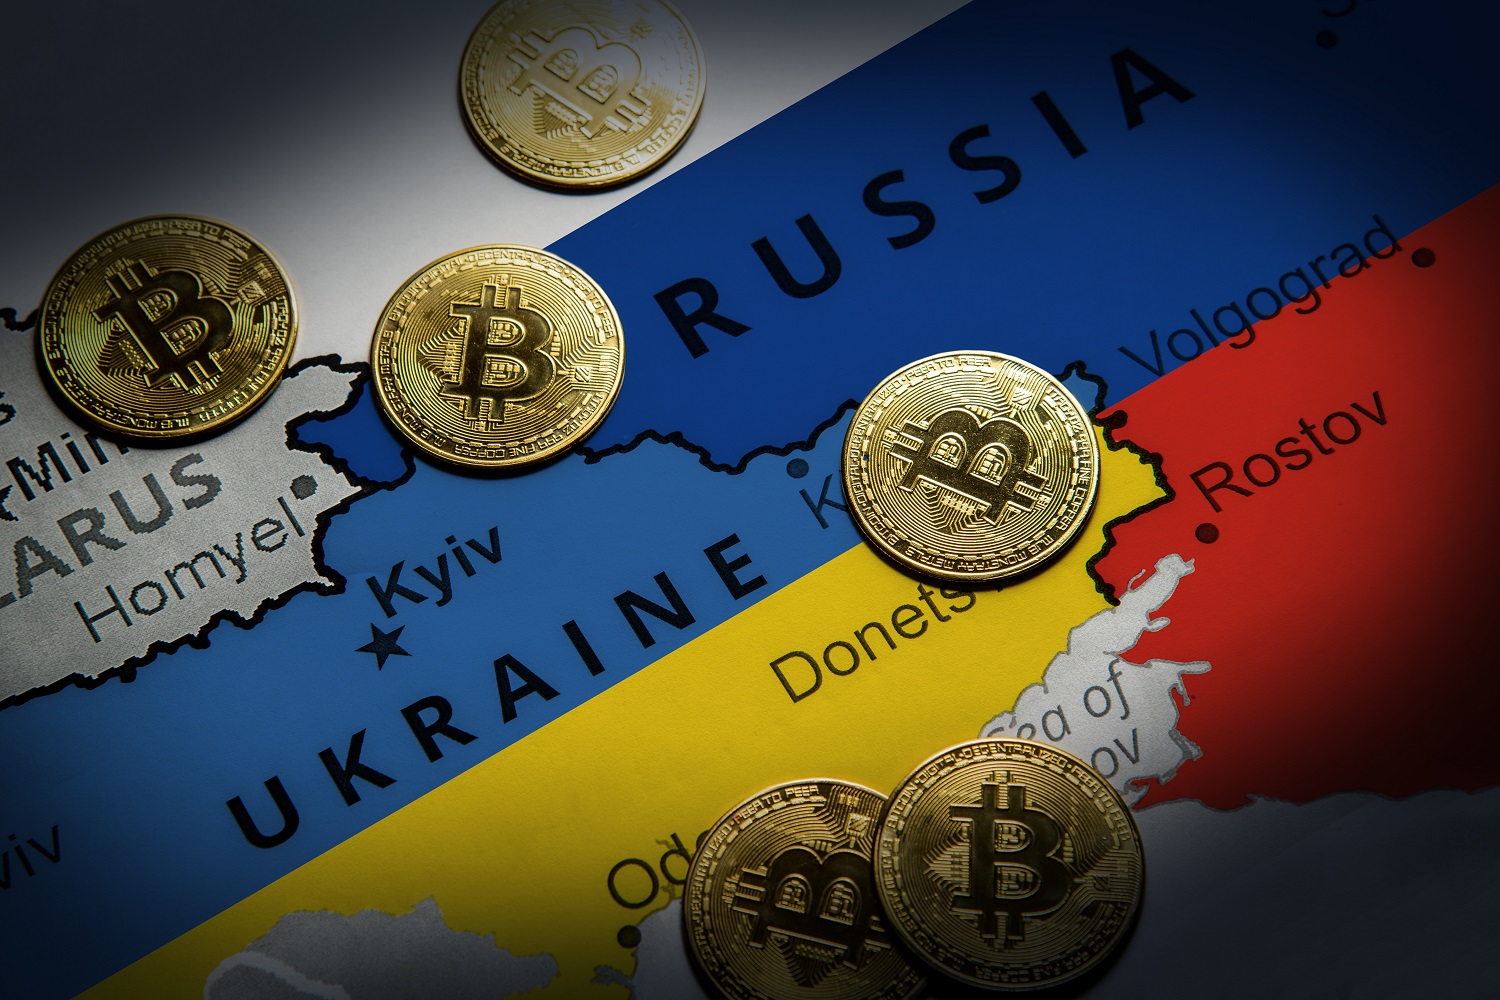 Tokens intended to represent Bitcoin on a map of Russia and Ukraine, with each nation colored in the hues of its national flag.